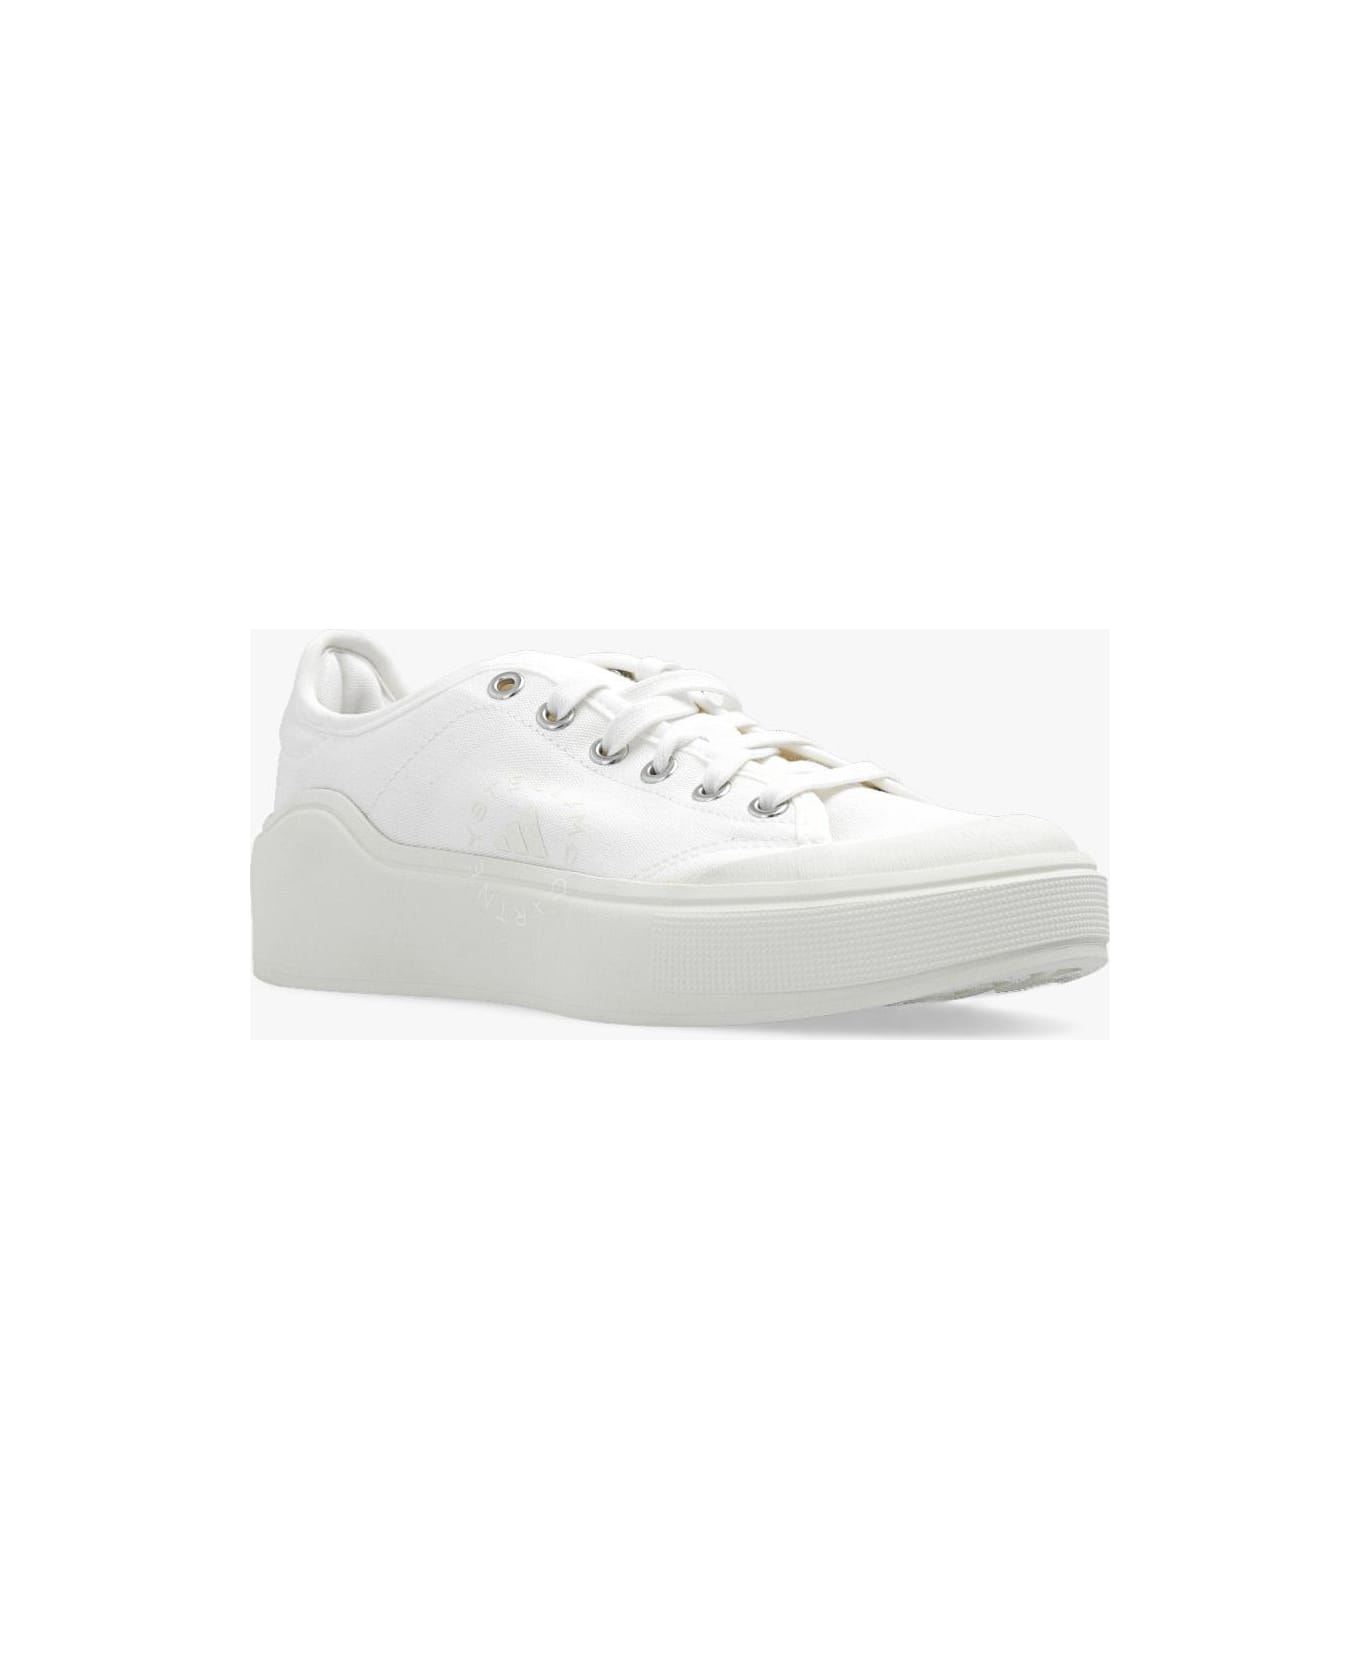 Adidas by Stella McCartney 'court' Sneakers